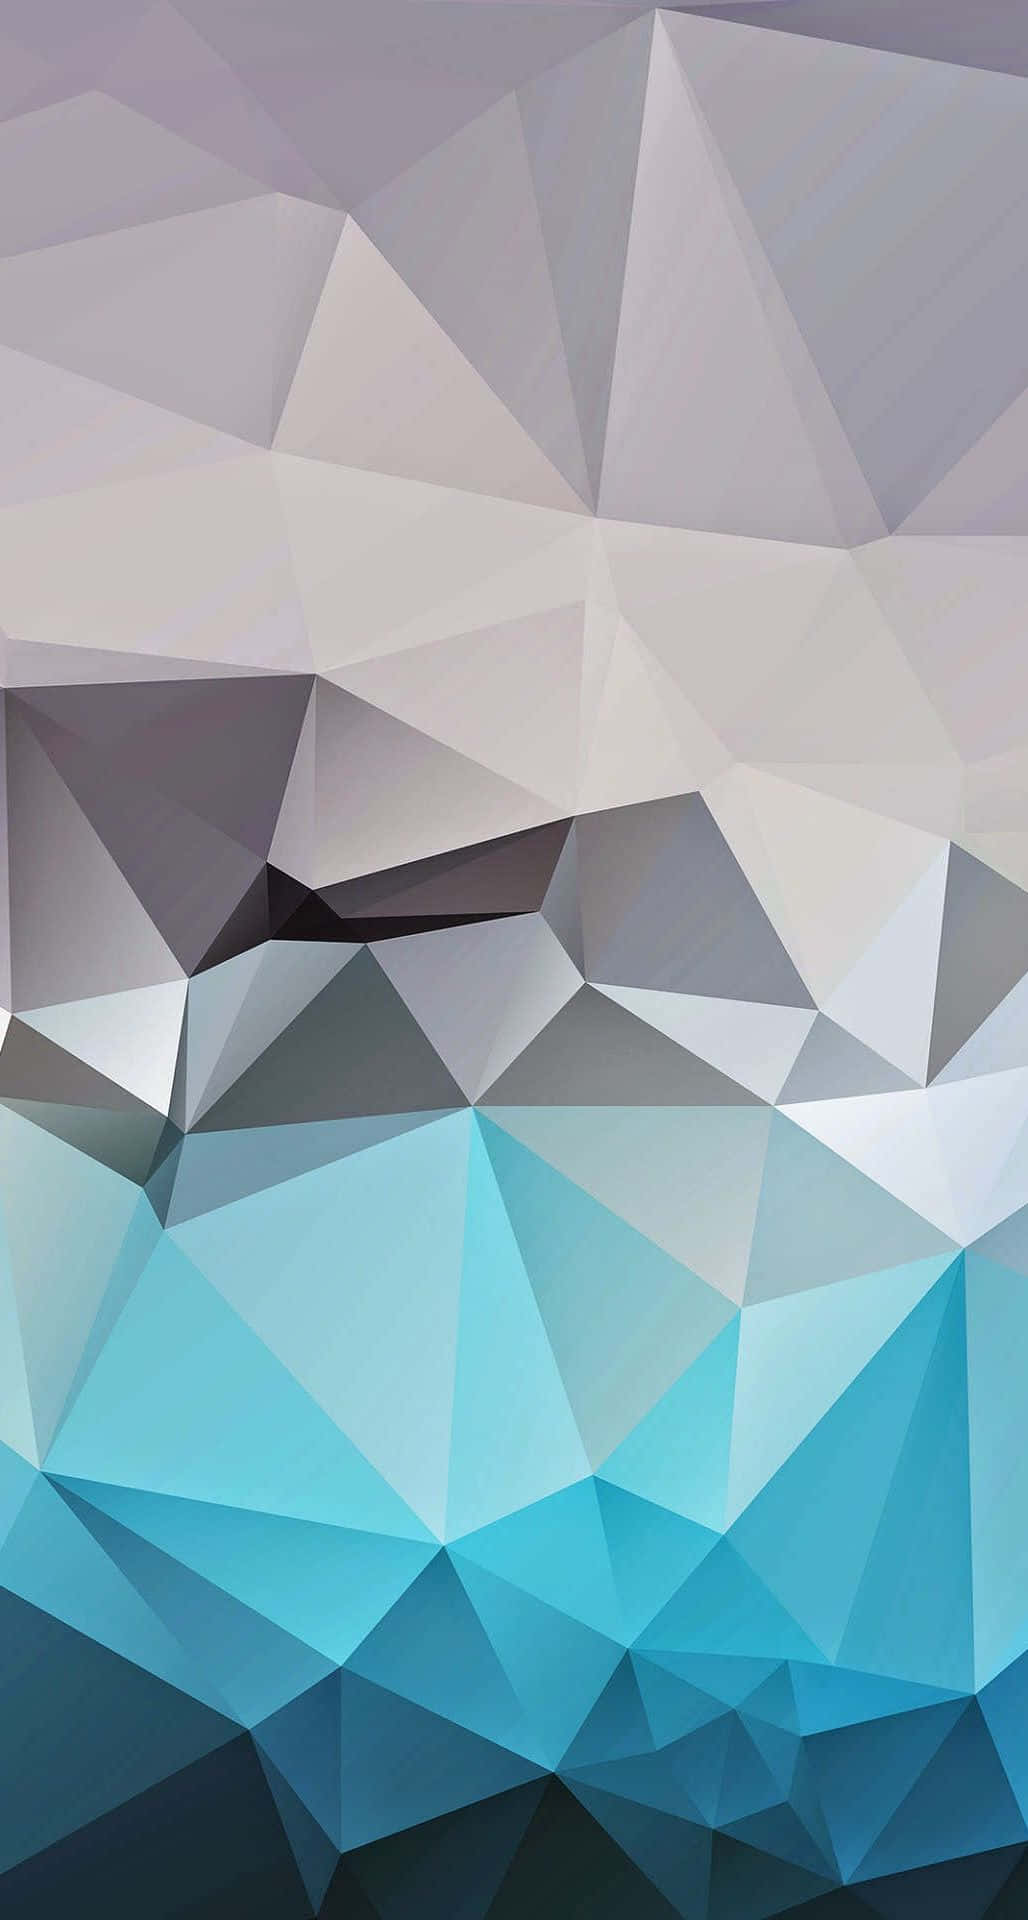 Experience aesthetic beauty with the Geometric Iphone Wallpaper